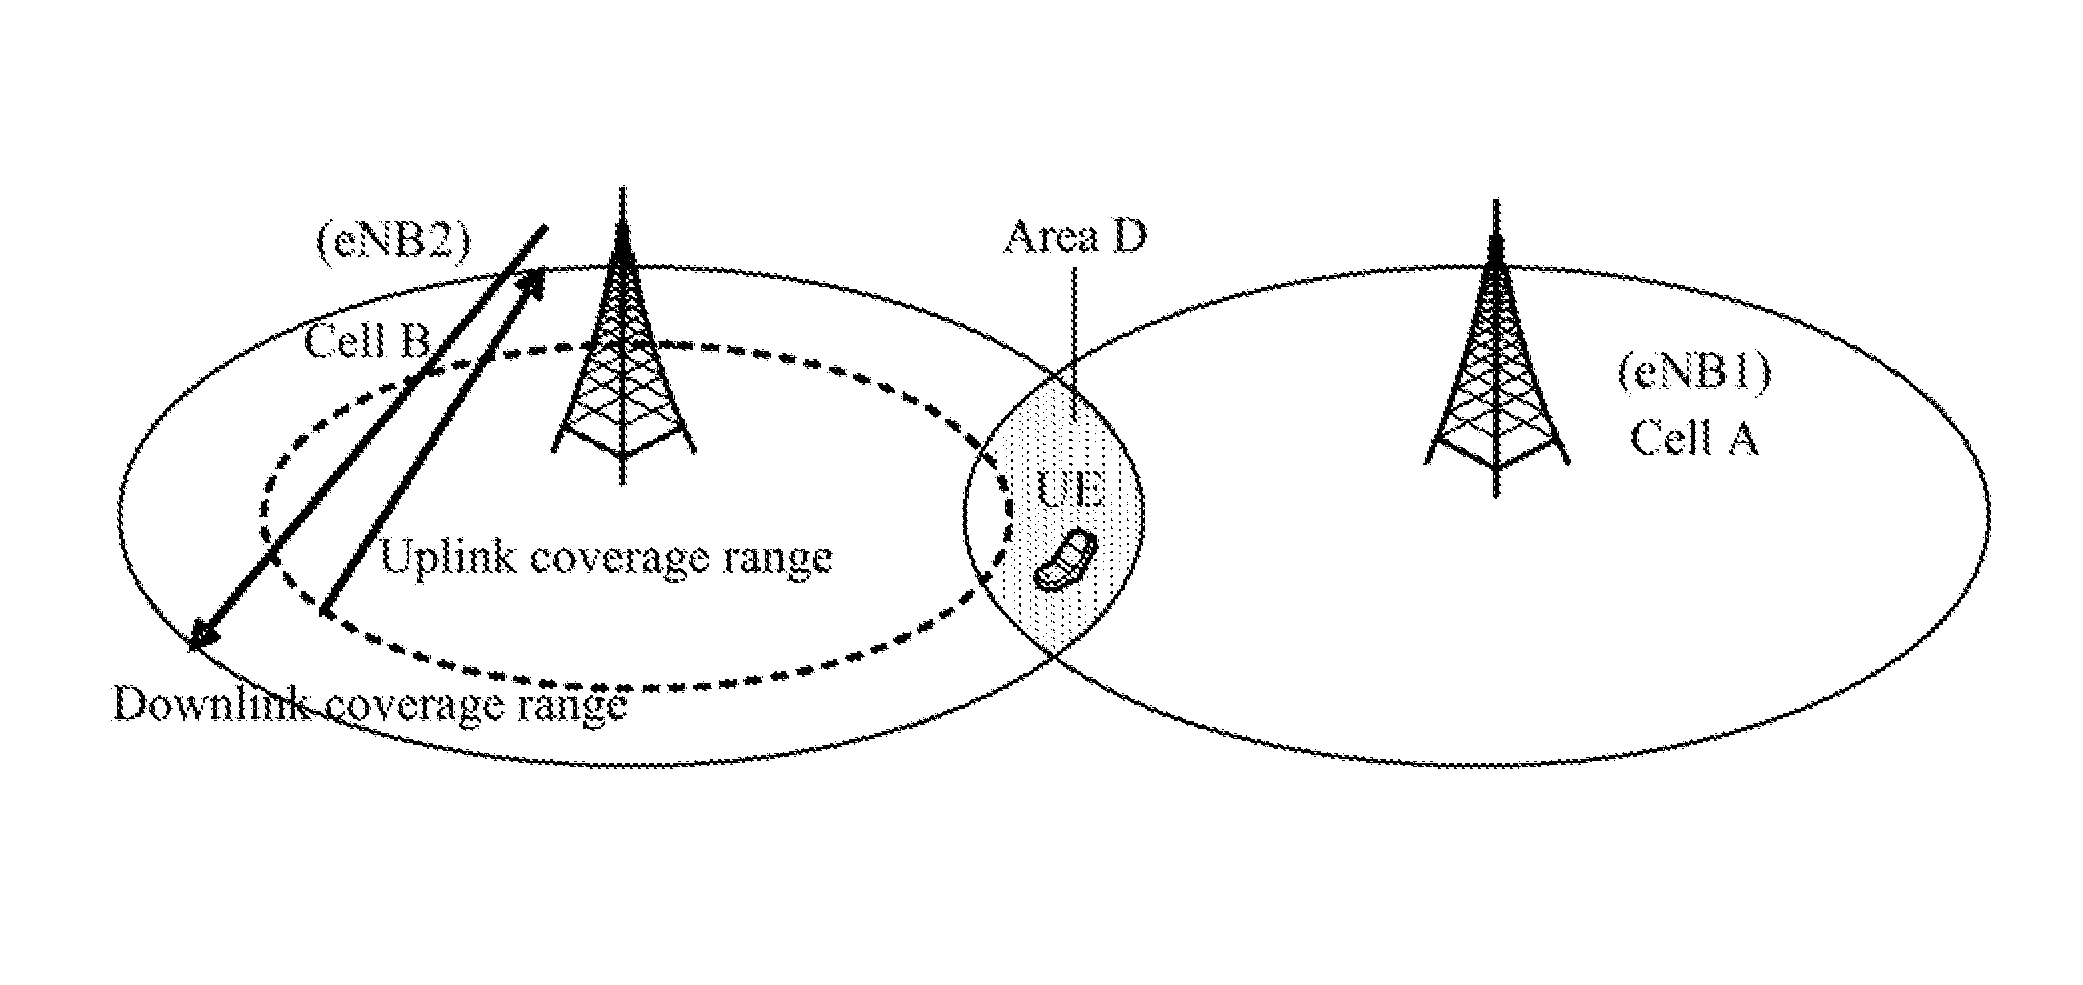 Method for obtaining uplink signal quality of an adjacent cell and method for optimizing handoff